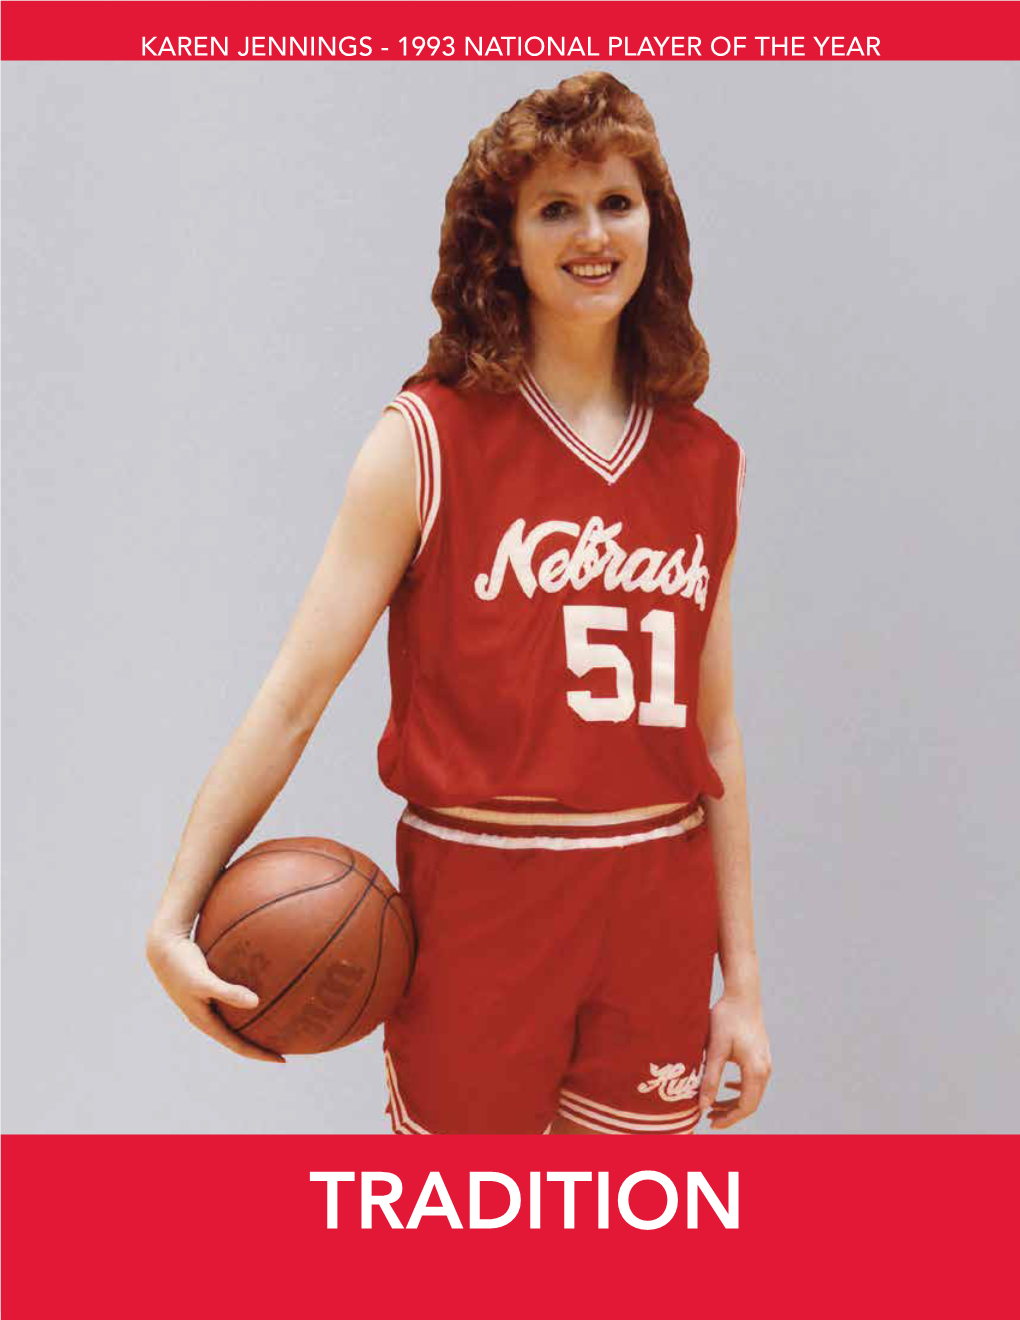 TRADITION 174 2017-18 NEBRASKA WOMEN's BASKETBALL HUSKERS ENTER NEW ERA with WILLIAMS by Mike Babcock & Jeff Griesch "This Team of Huskers Likes to Practice